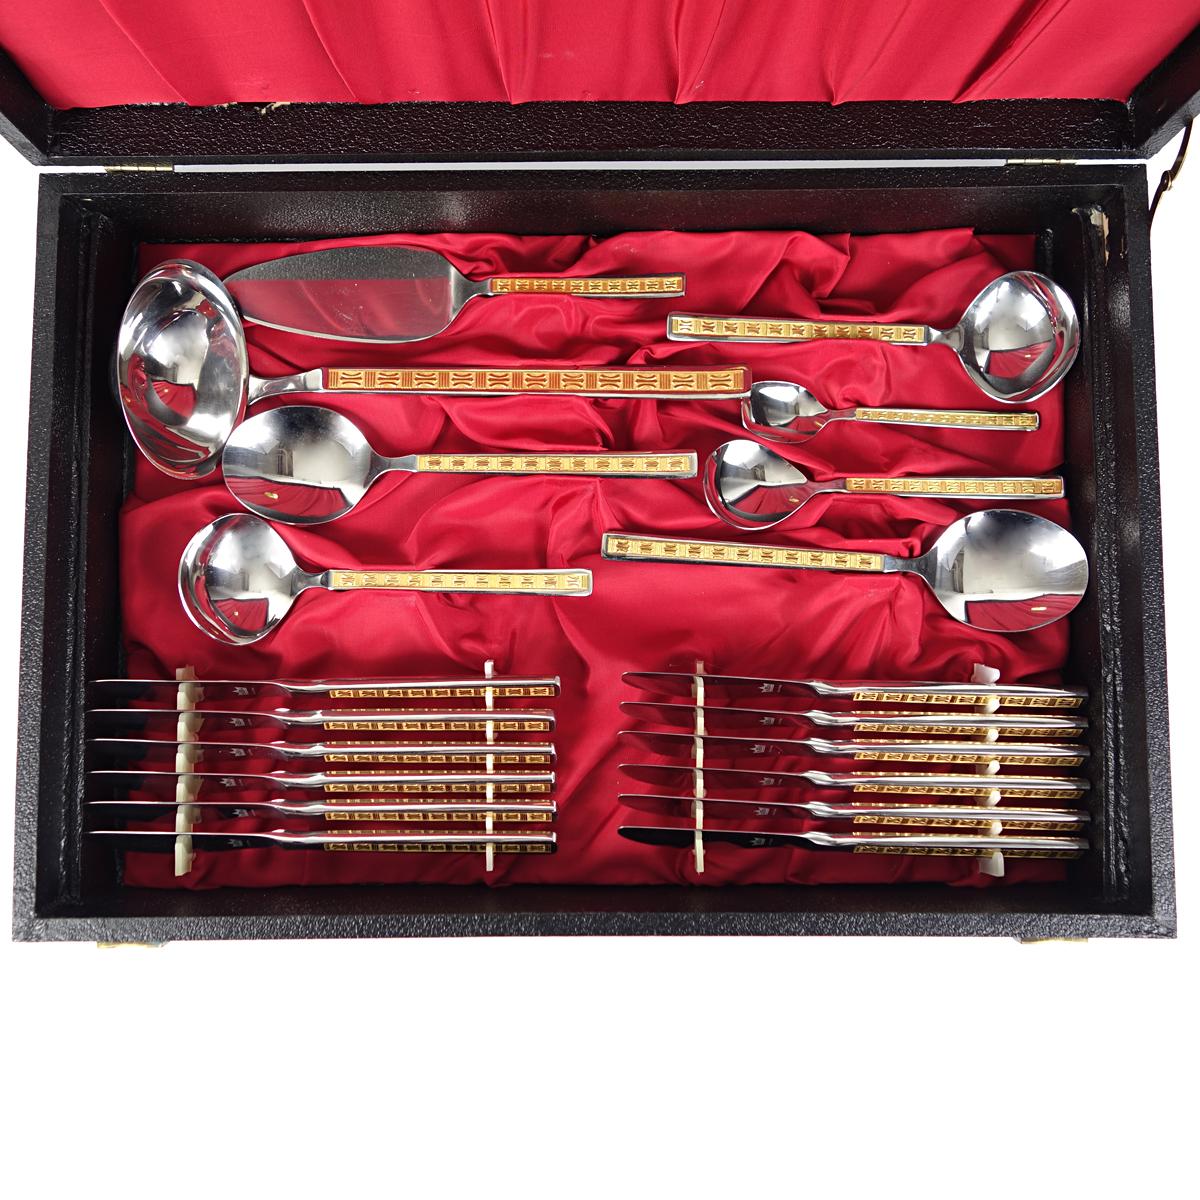 This wonderfully eclectic cutlery set in a luxurious case serves 12 persons. The design is a gem on every dining table. The sleek straight lines of the stainless steel form a great contrast with the gilded decorations on the blades. 
SBS cutlery